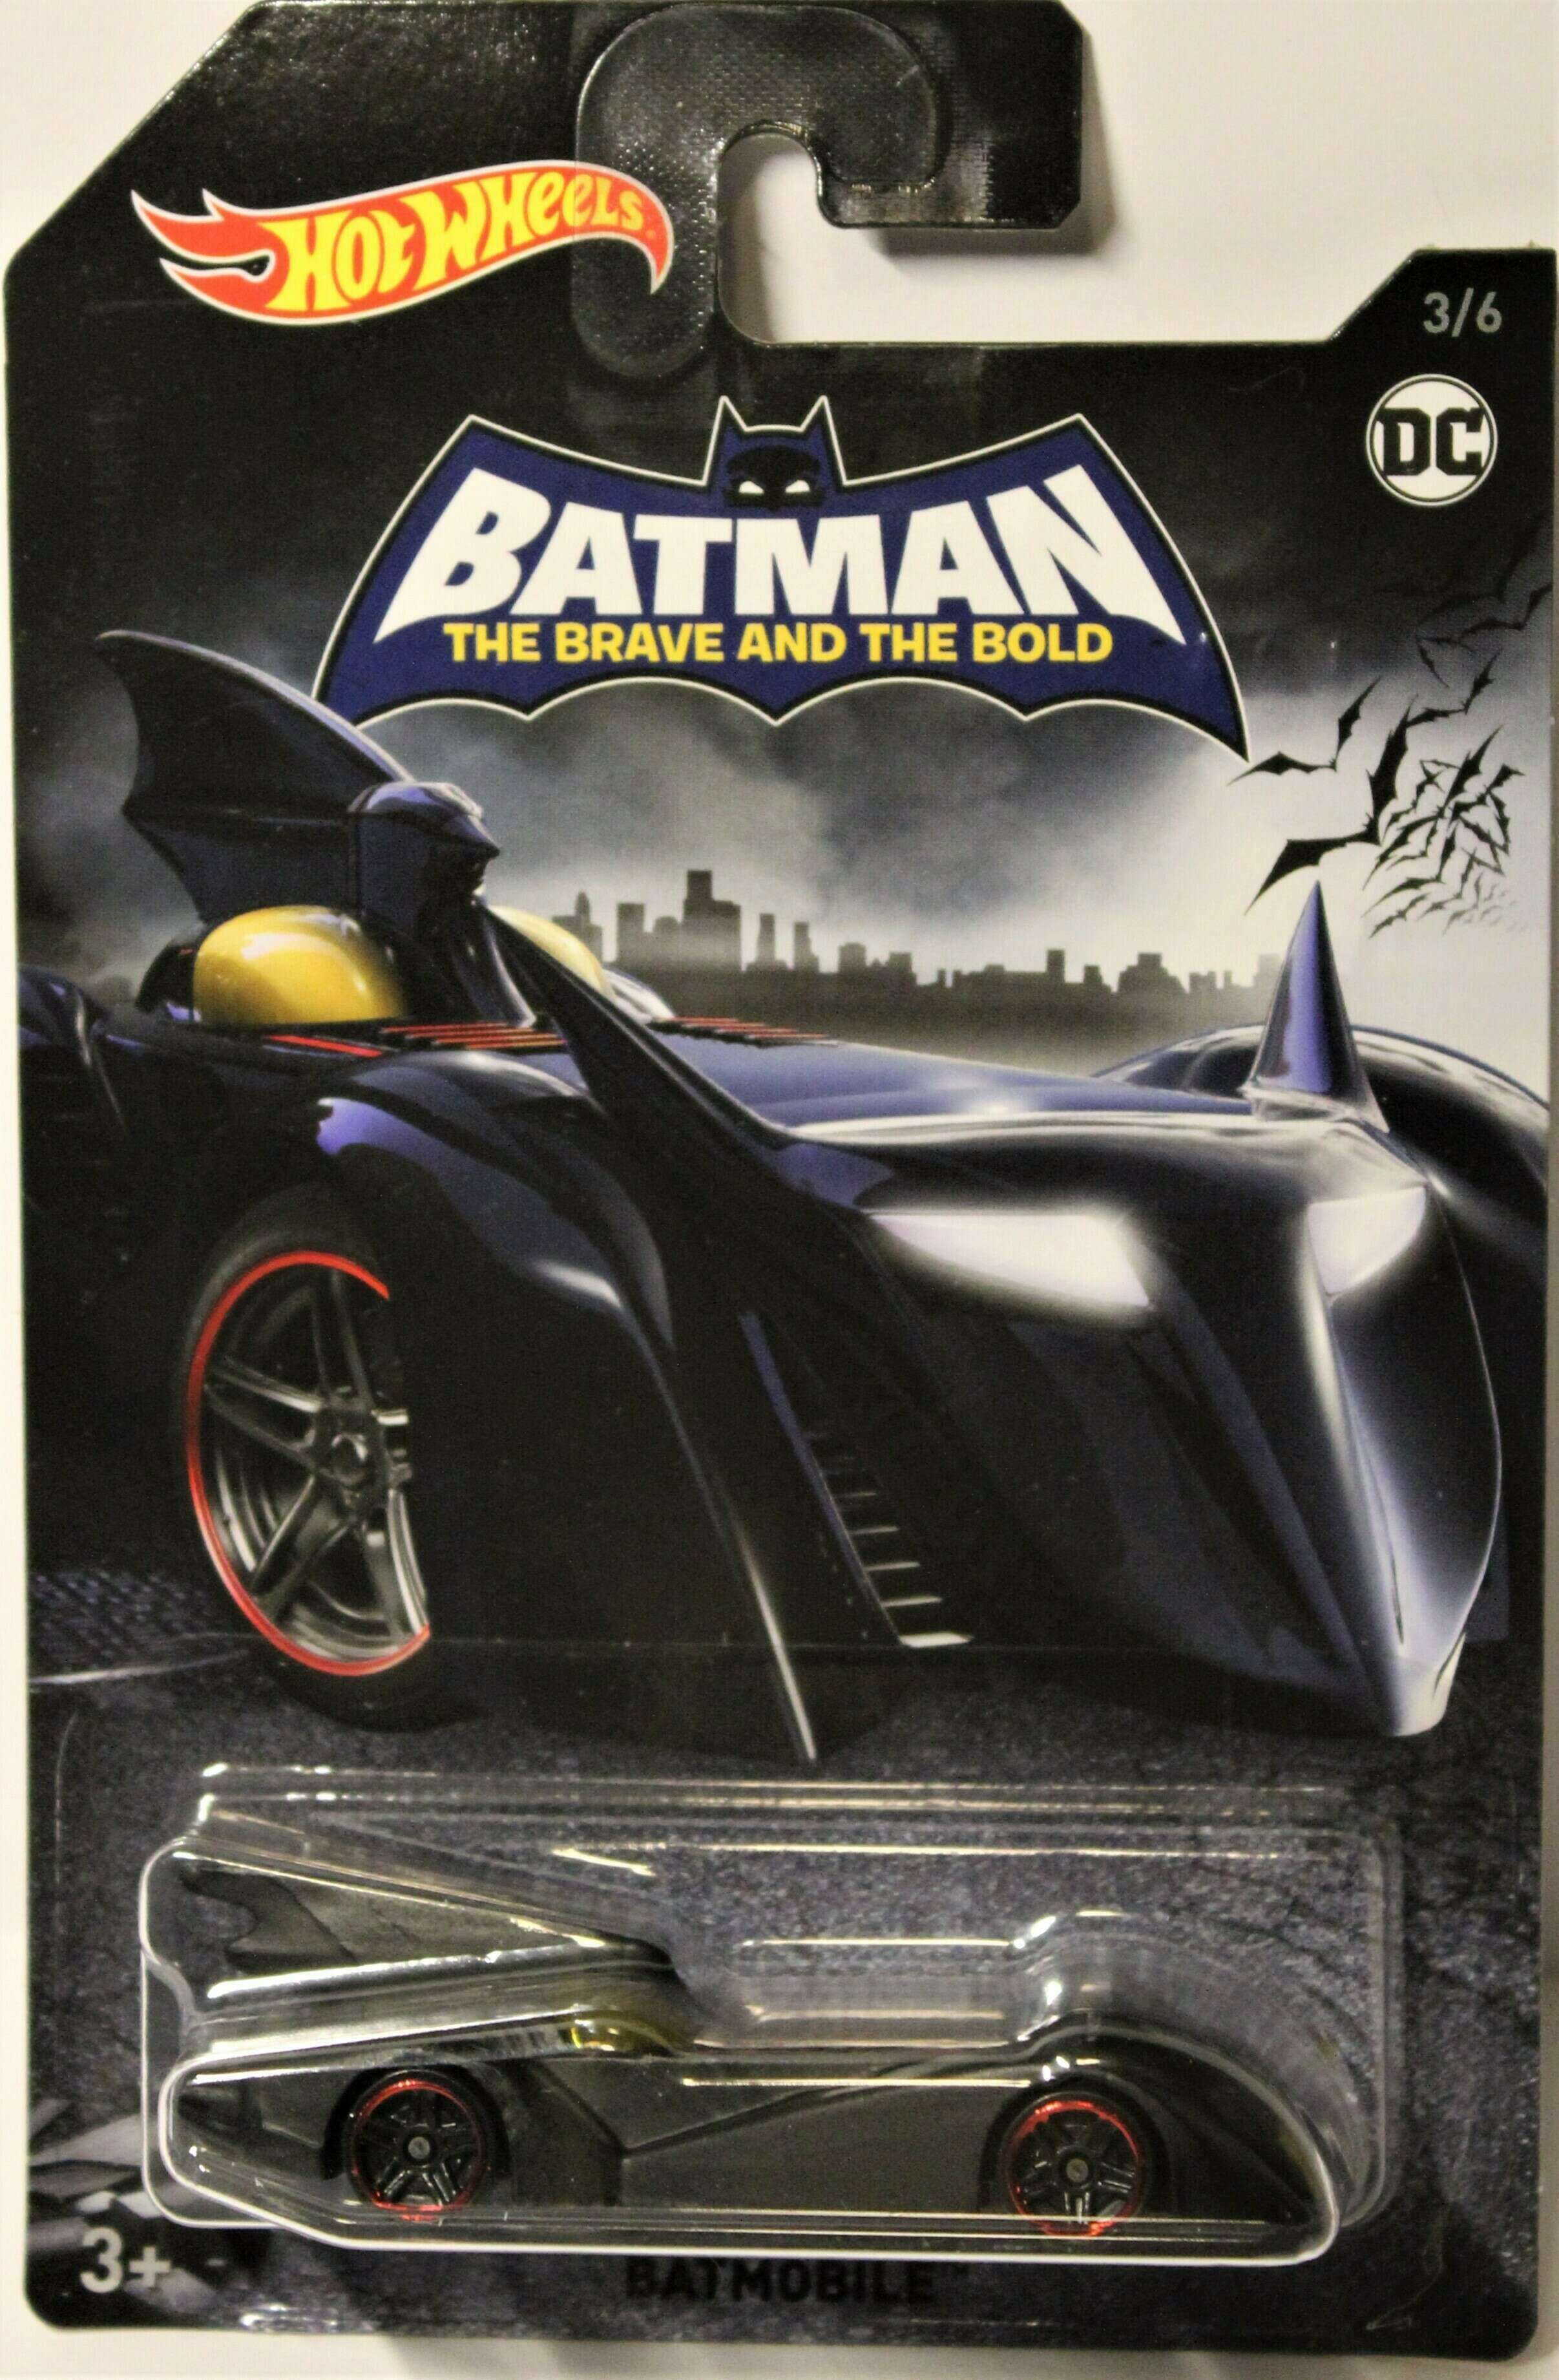 Batmobile / Batman : The Brave and the Bold (Animated) 2018 Hot Wheels /  Walmart Exclusive Series (3/8)